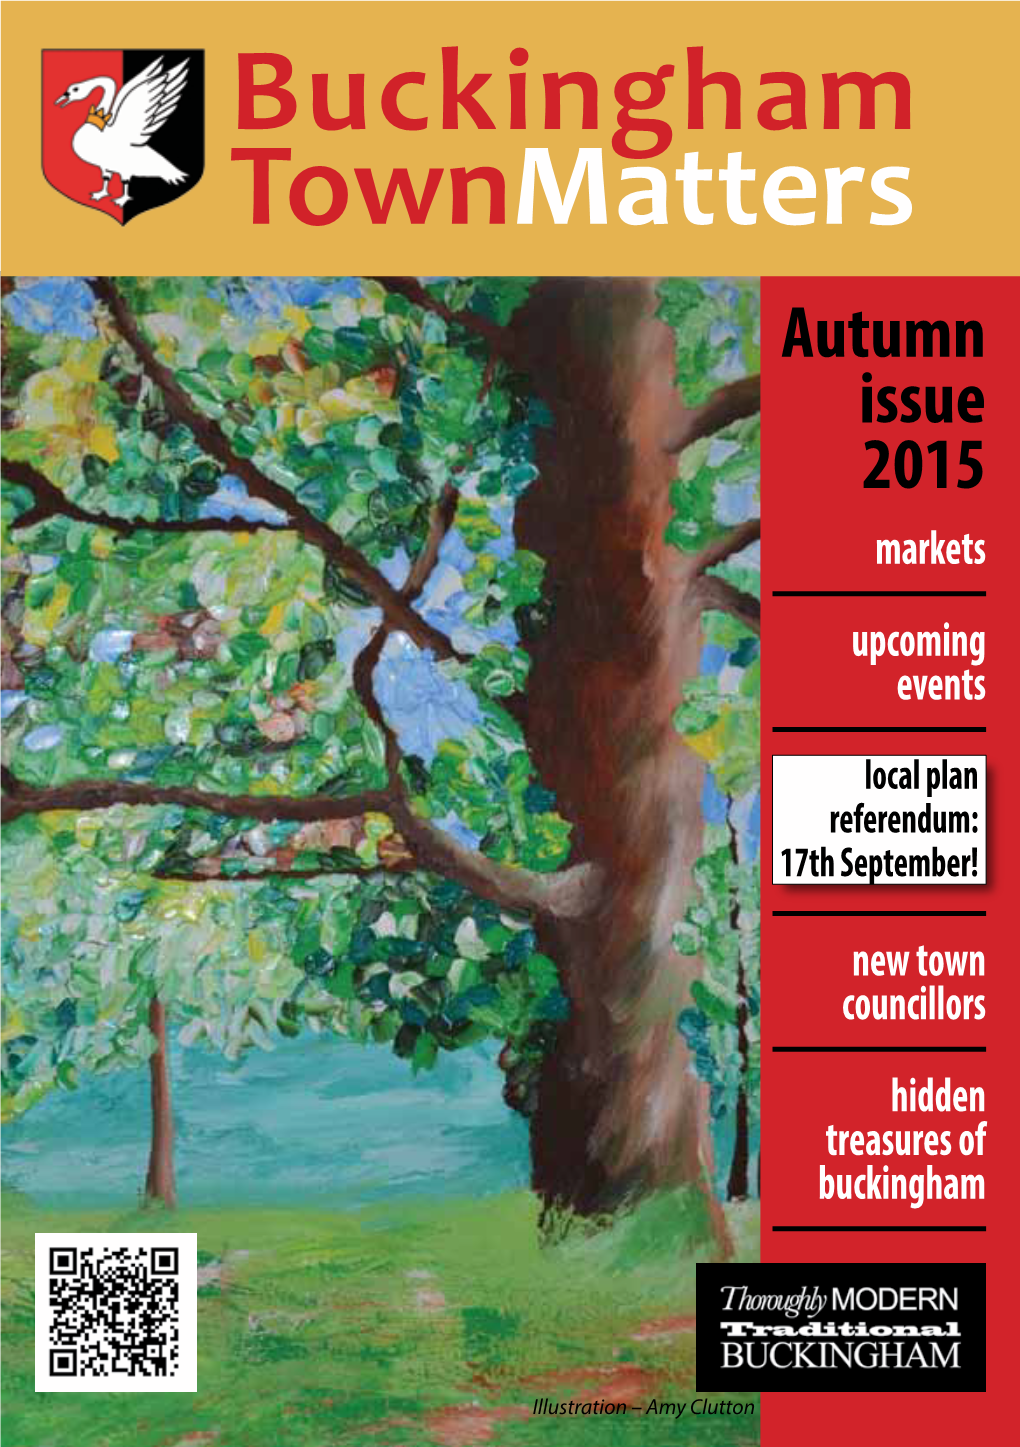 Buckingham Townmatters Autumn Issue 2015 Markets Upcoming Events